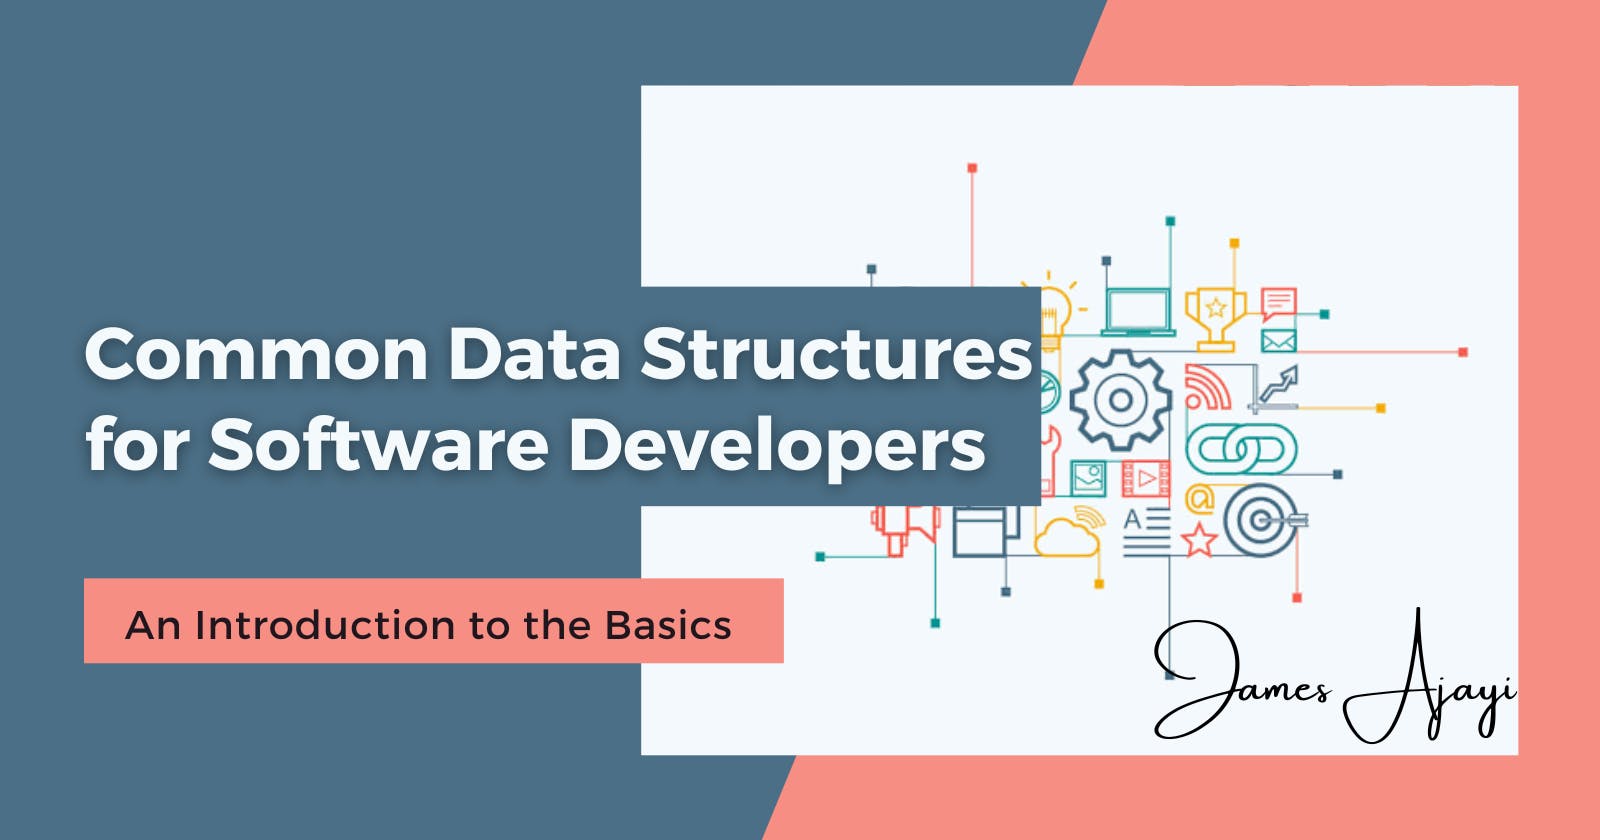 Common Data Structures for Software Developers